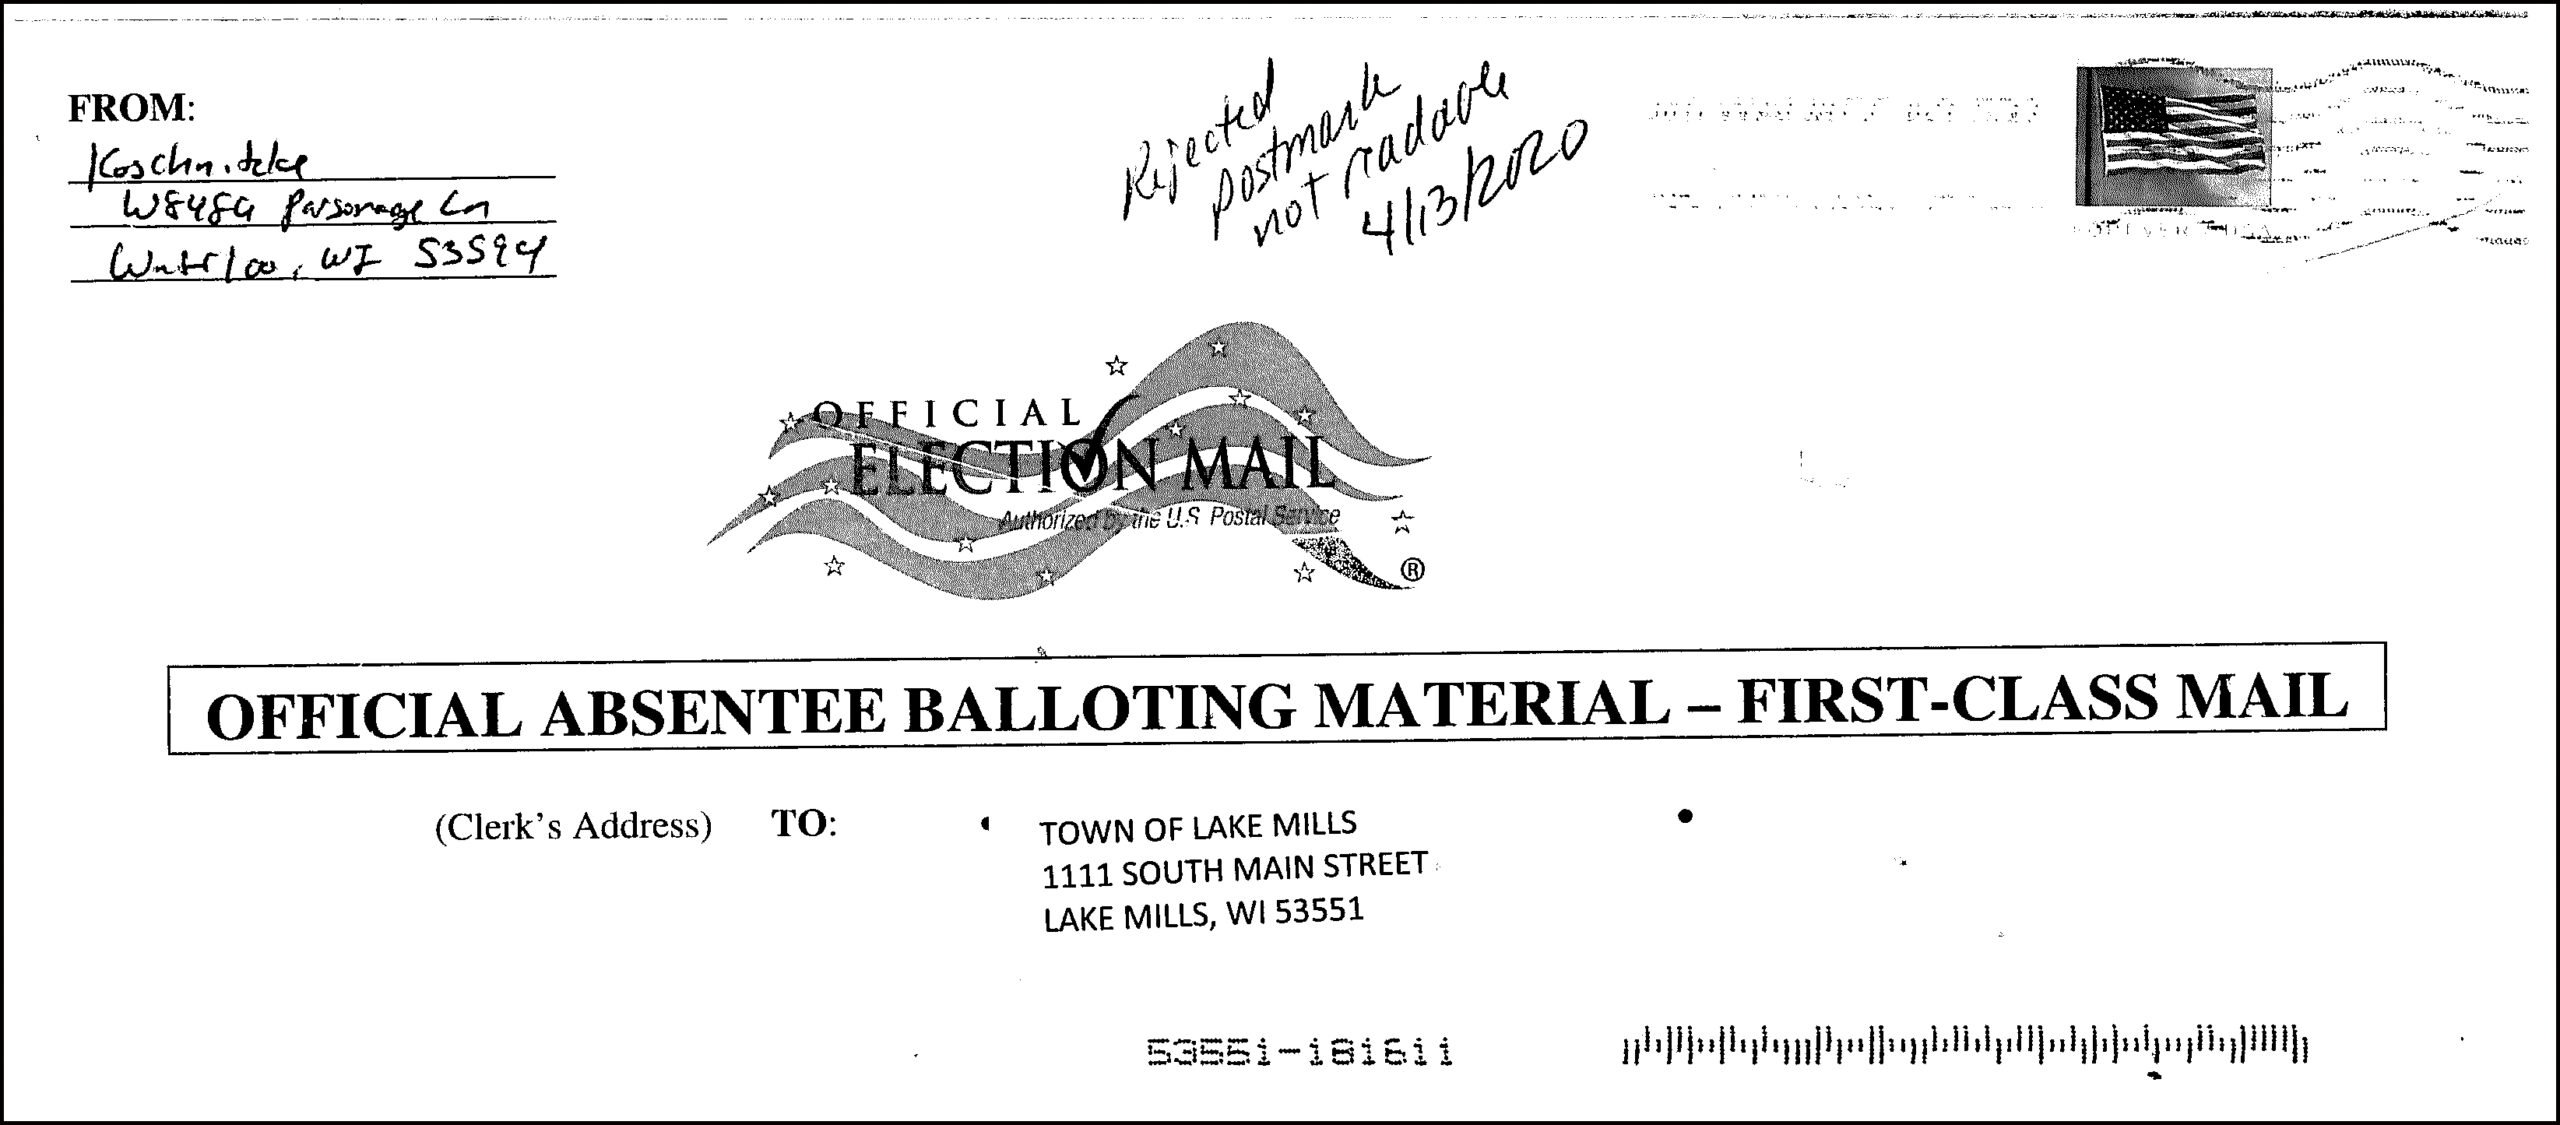 A rejected absentee ballot from the April 2020 election.